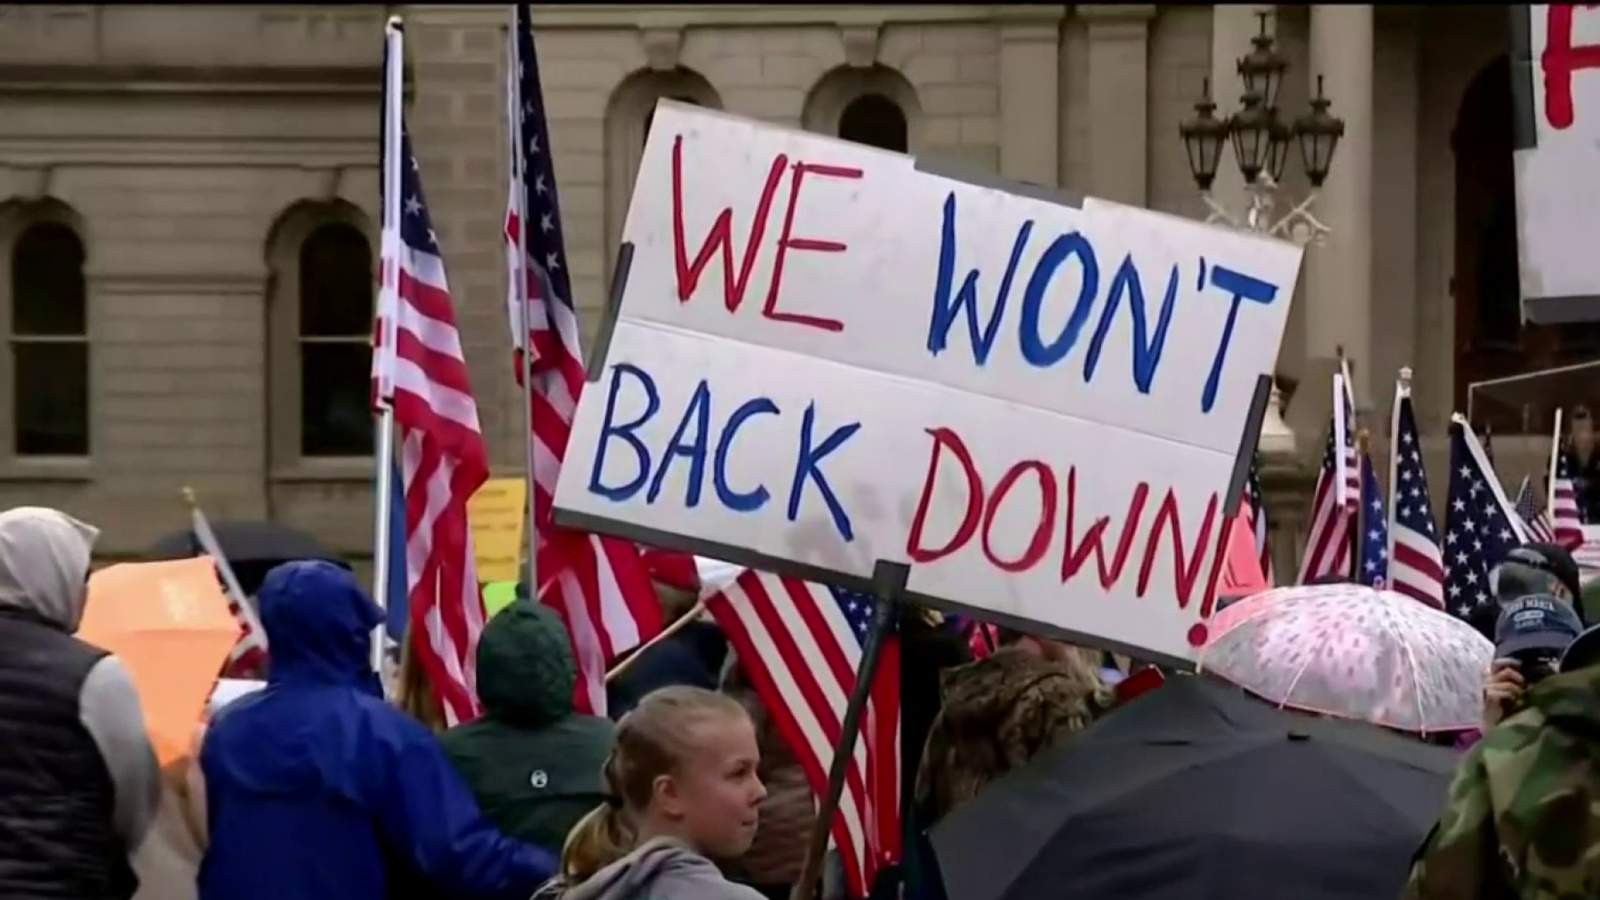 Gov. Whitmer condemns threats ahead of planned protest at Michigan Capitol